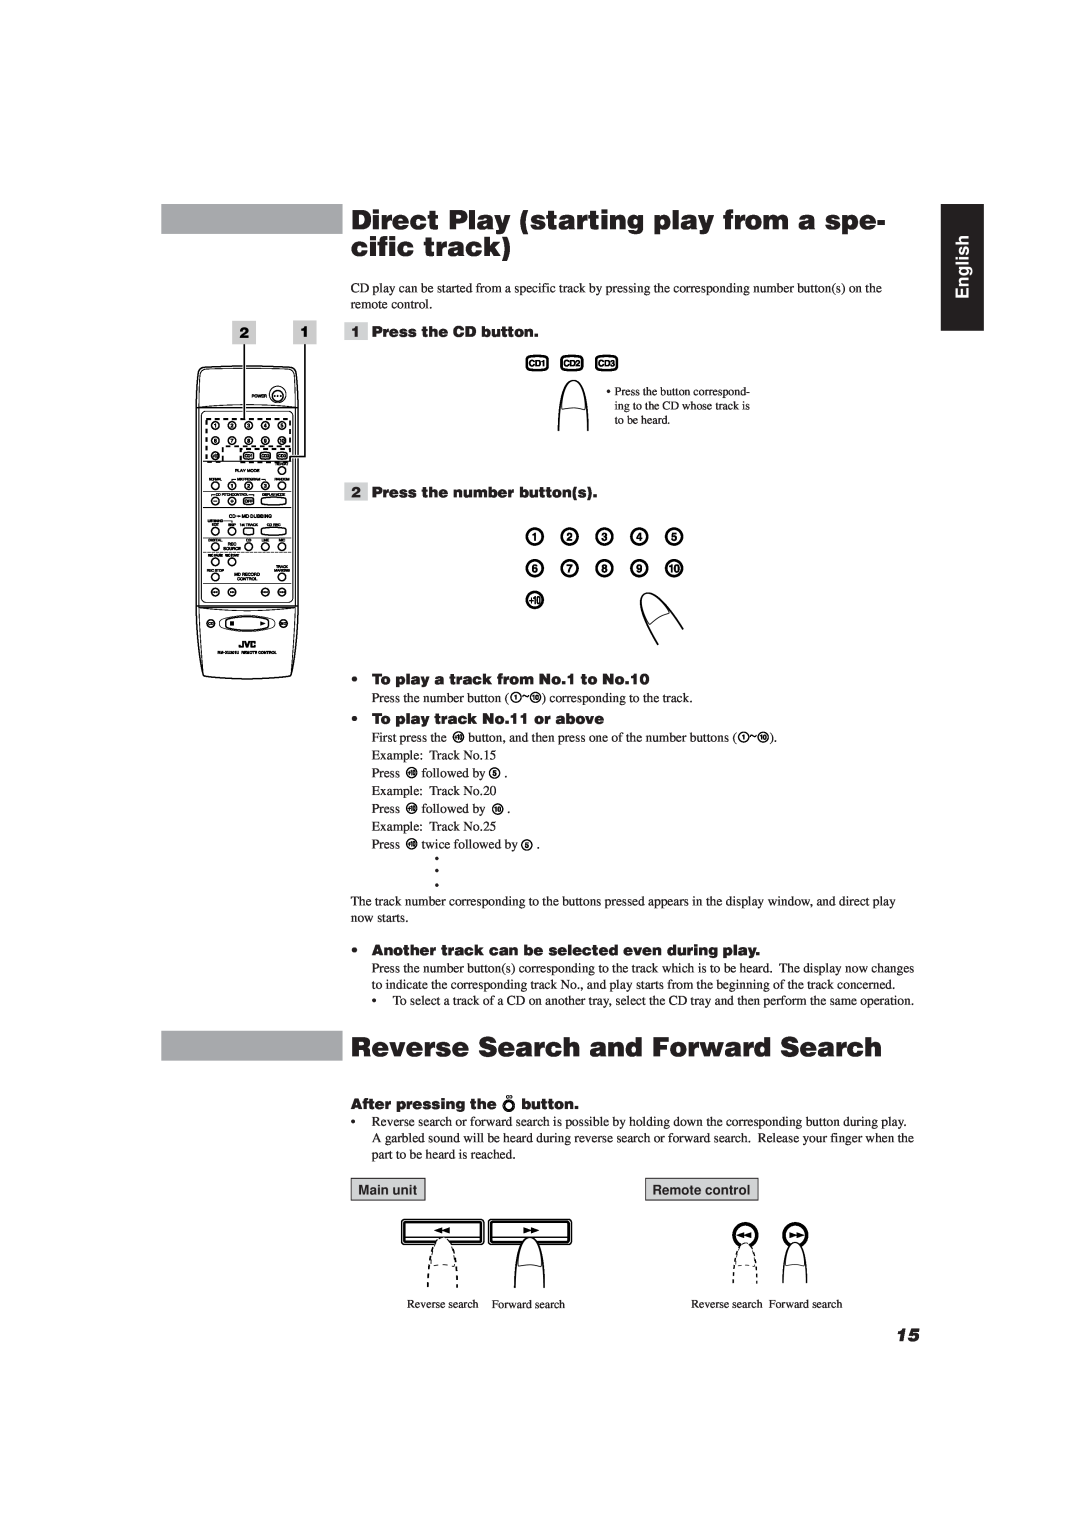 JVC XU-301 manual Direct Play starting play from a spe- cific track, Reverse Search and Forward Search, English 